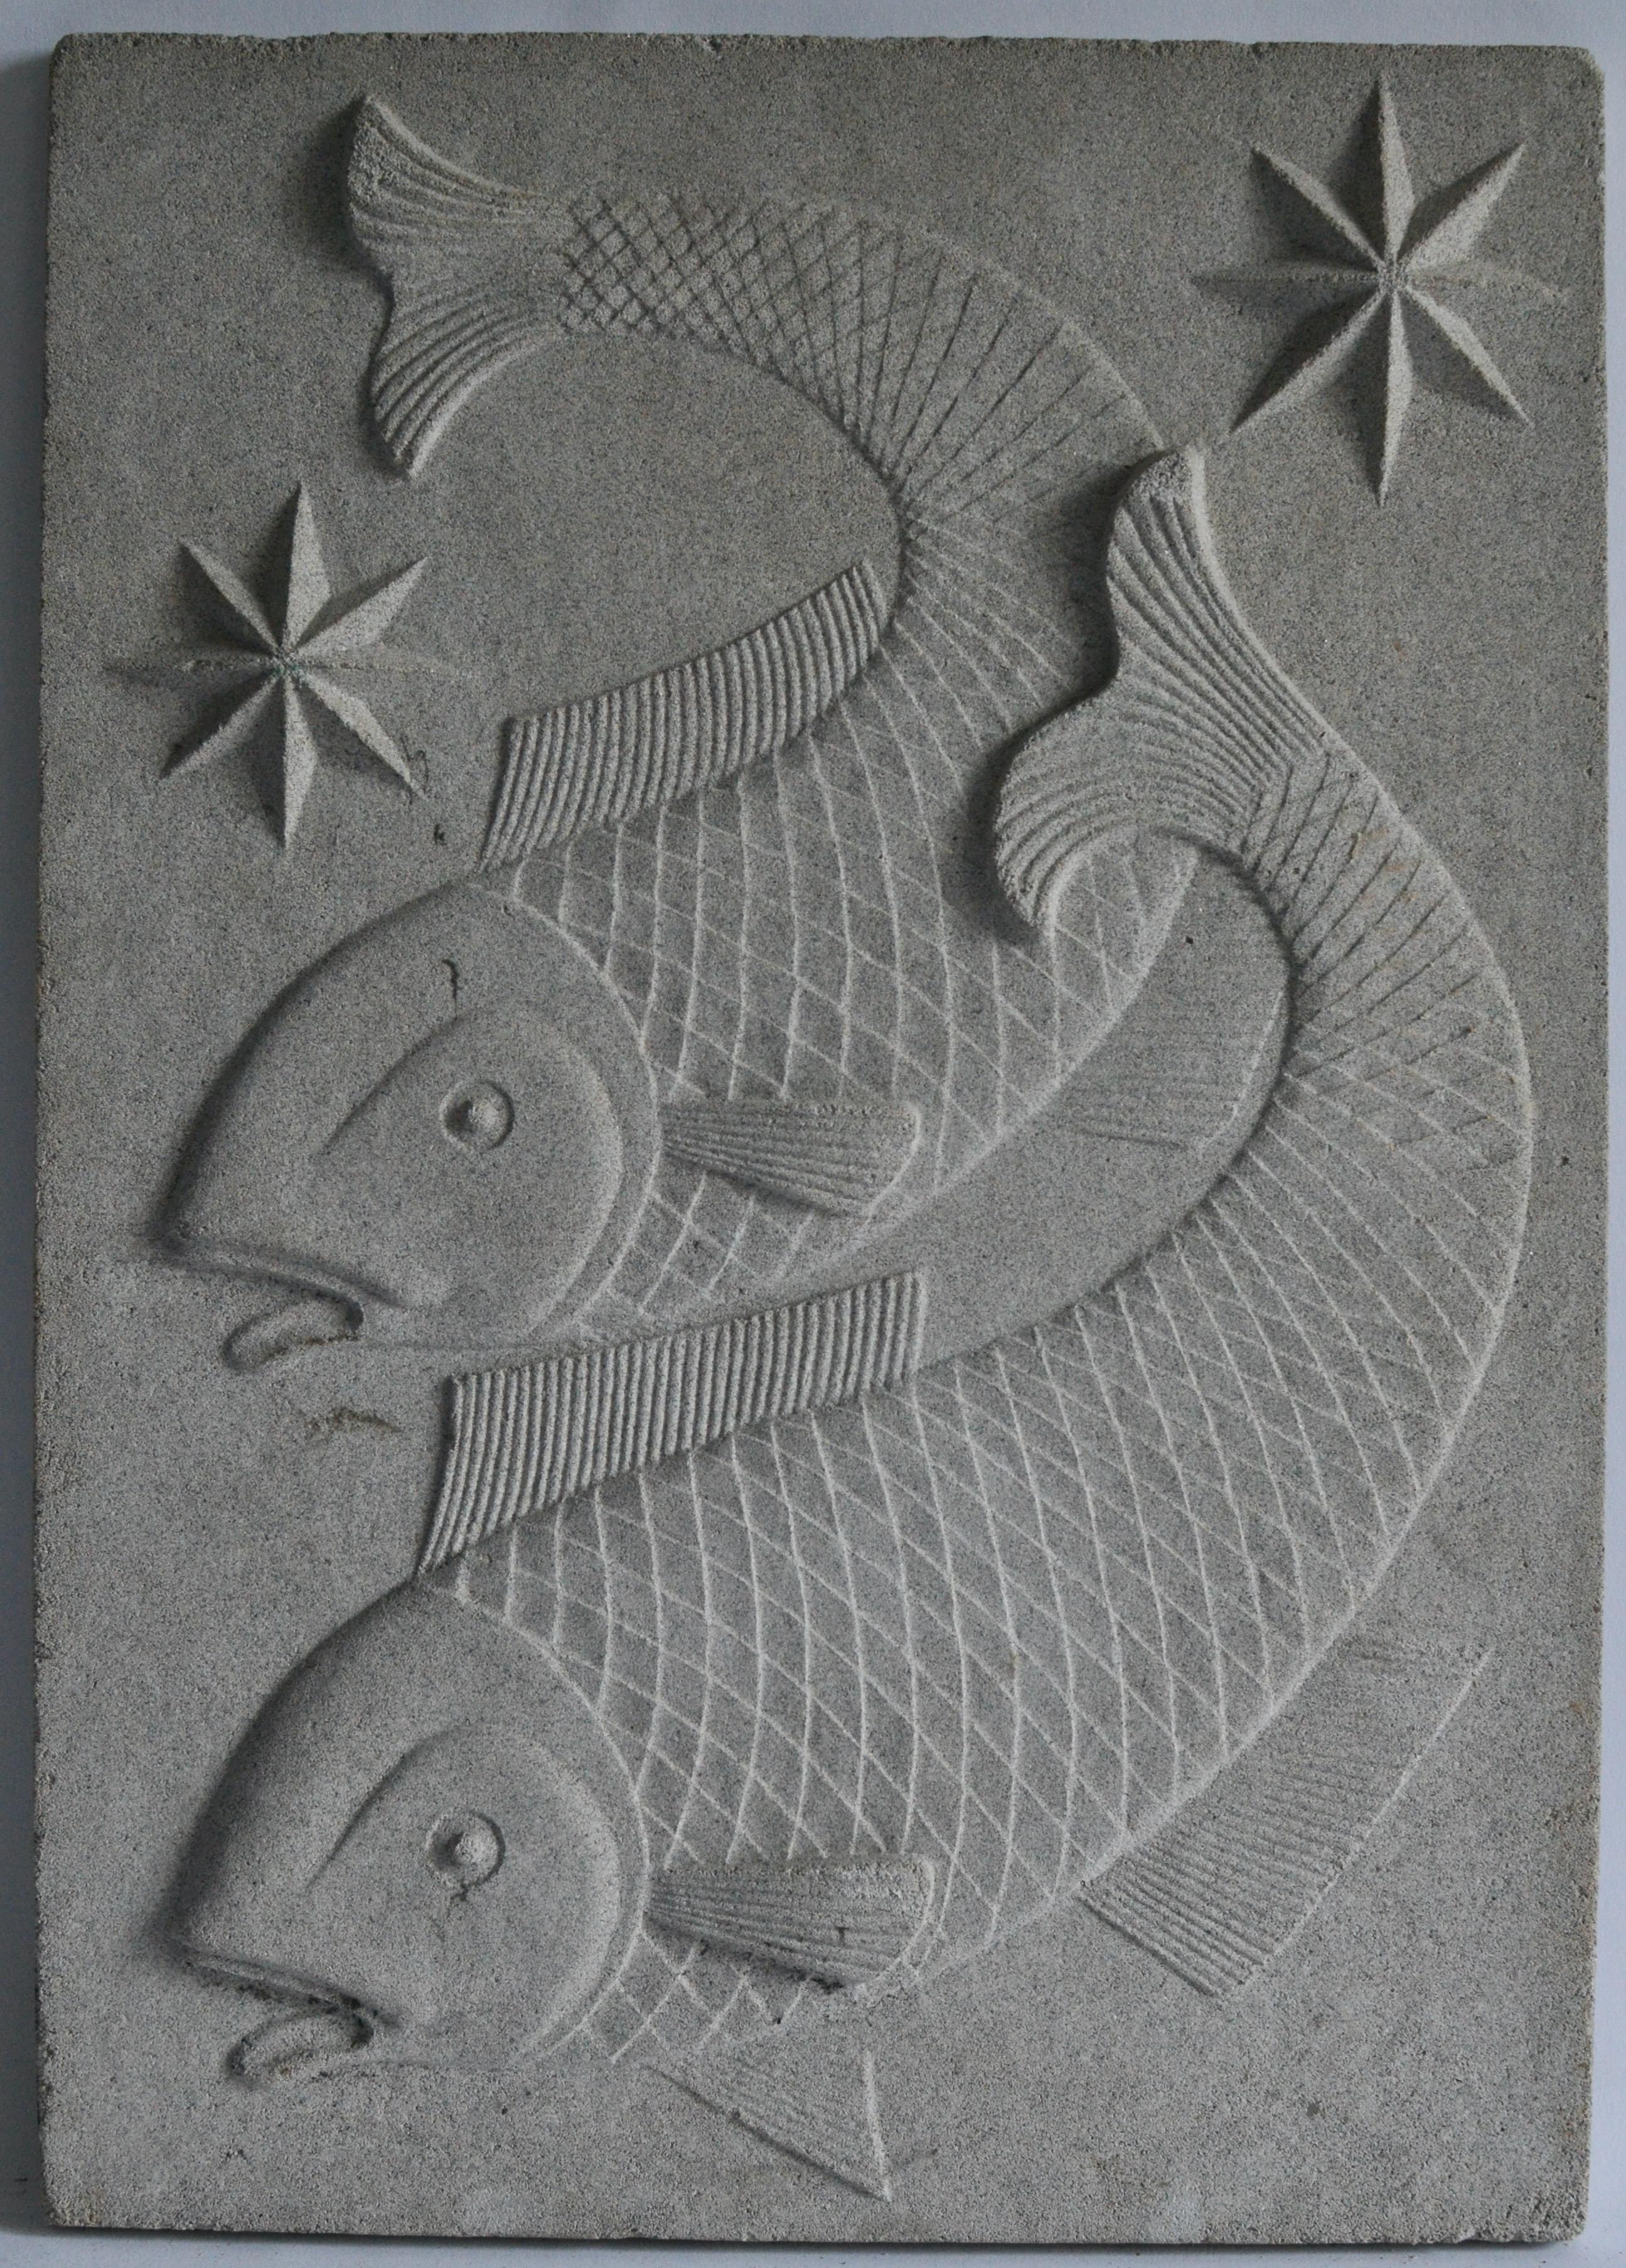 Swedish Zodiac Artificial Stone Relief Sign of Pisces, c. 1940